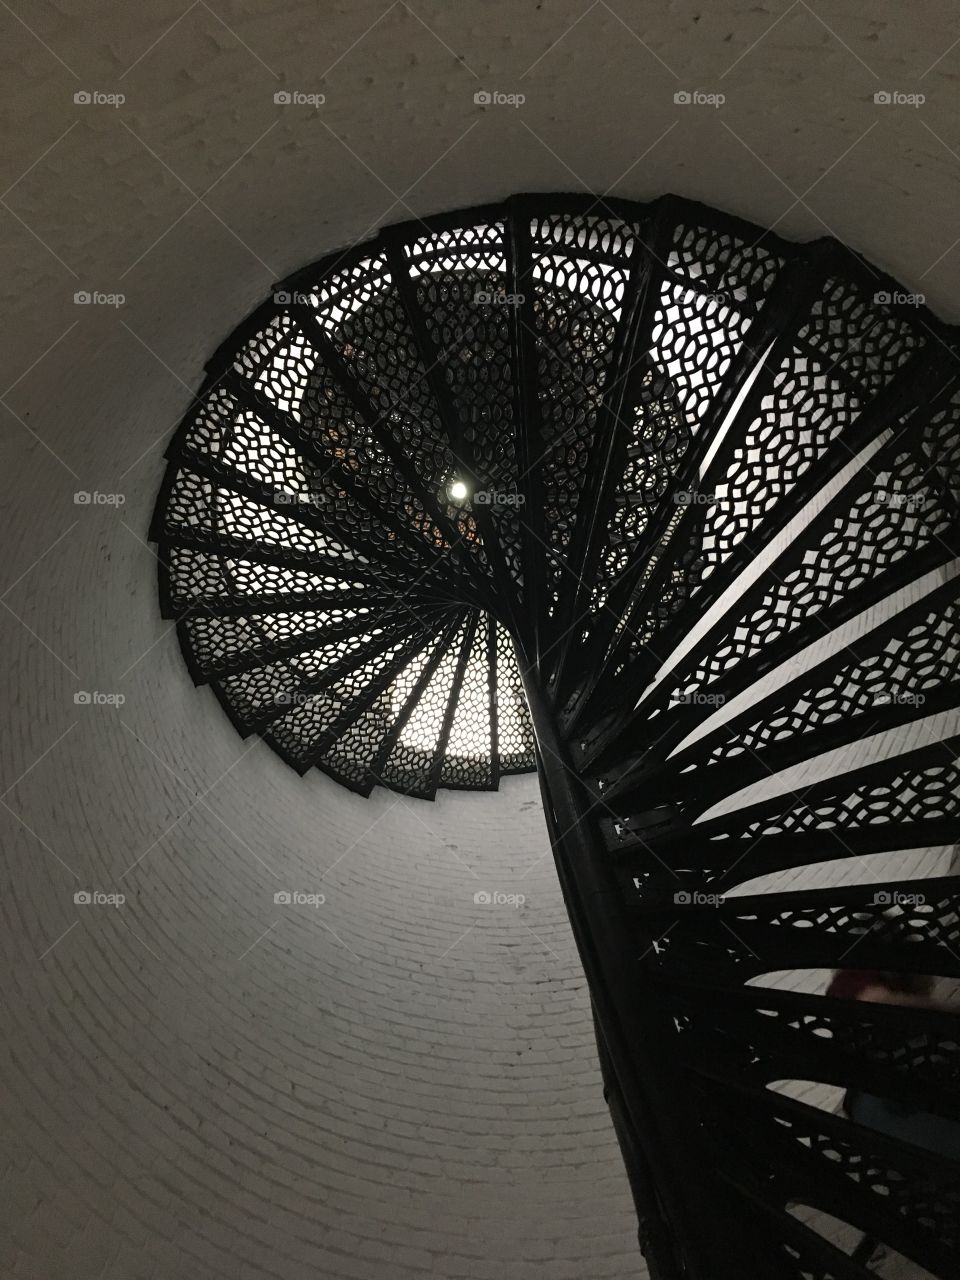 Stairway in the Pensacola Lighthouse 